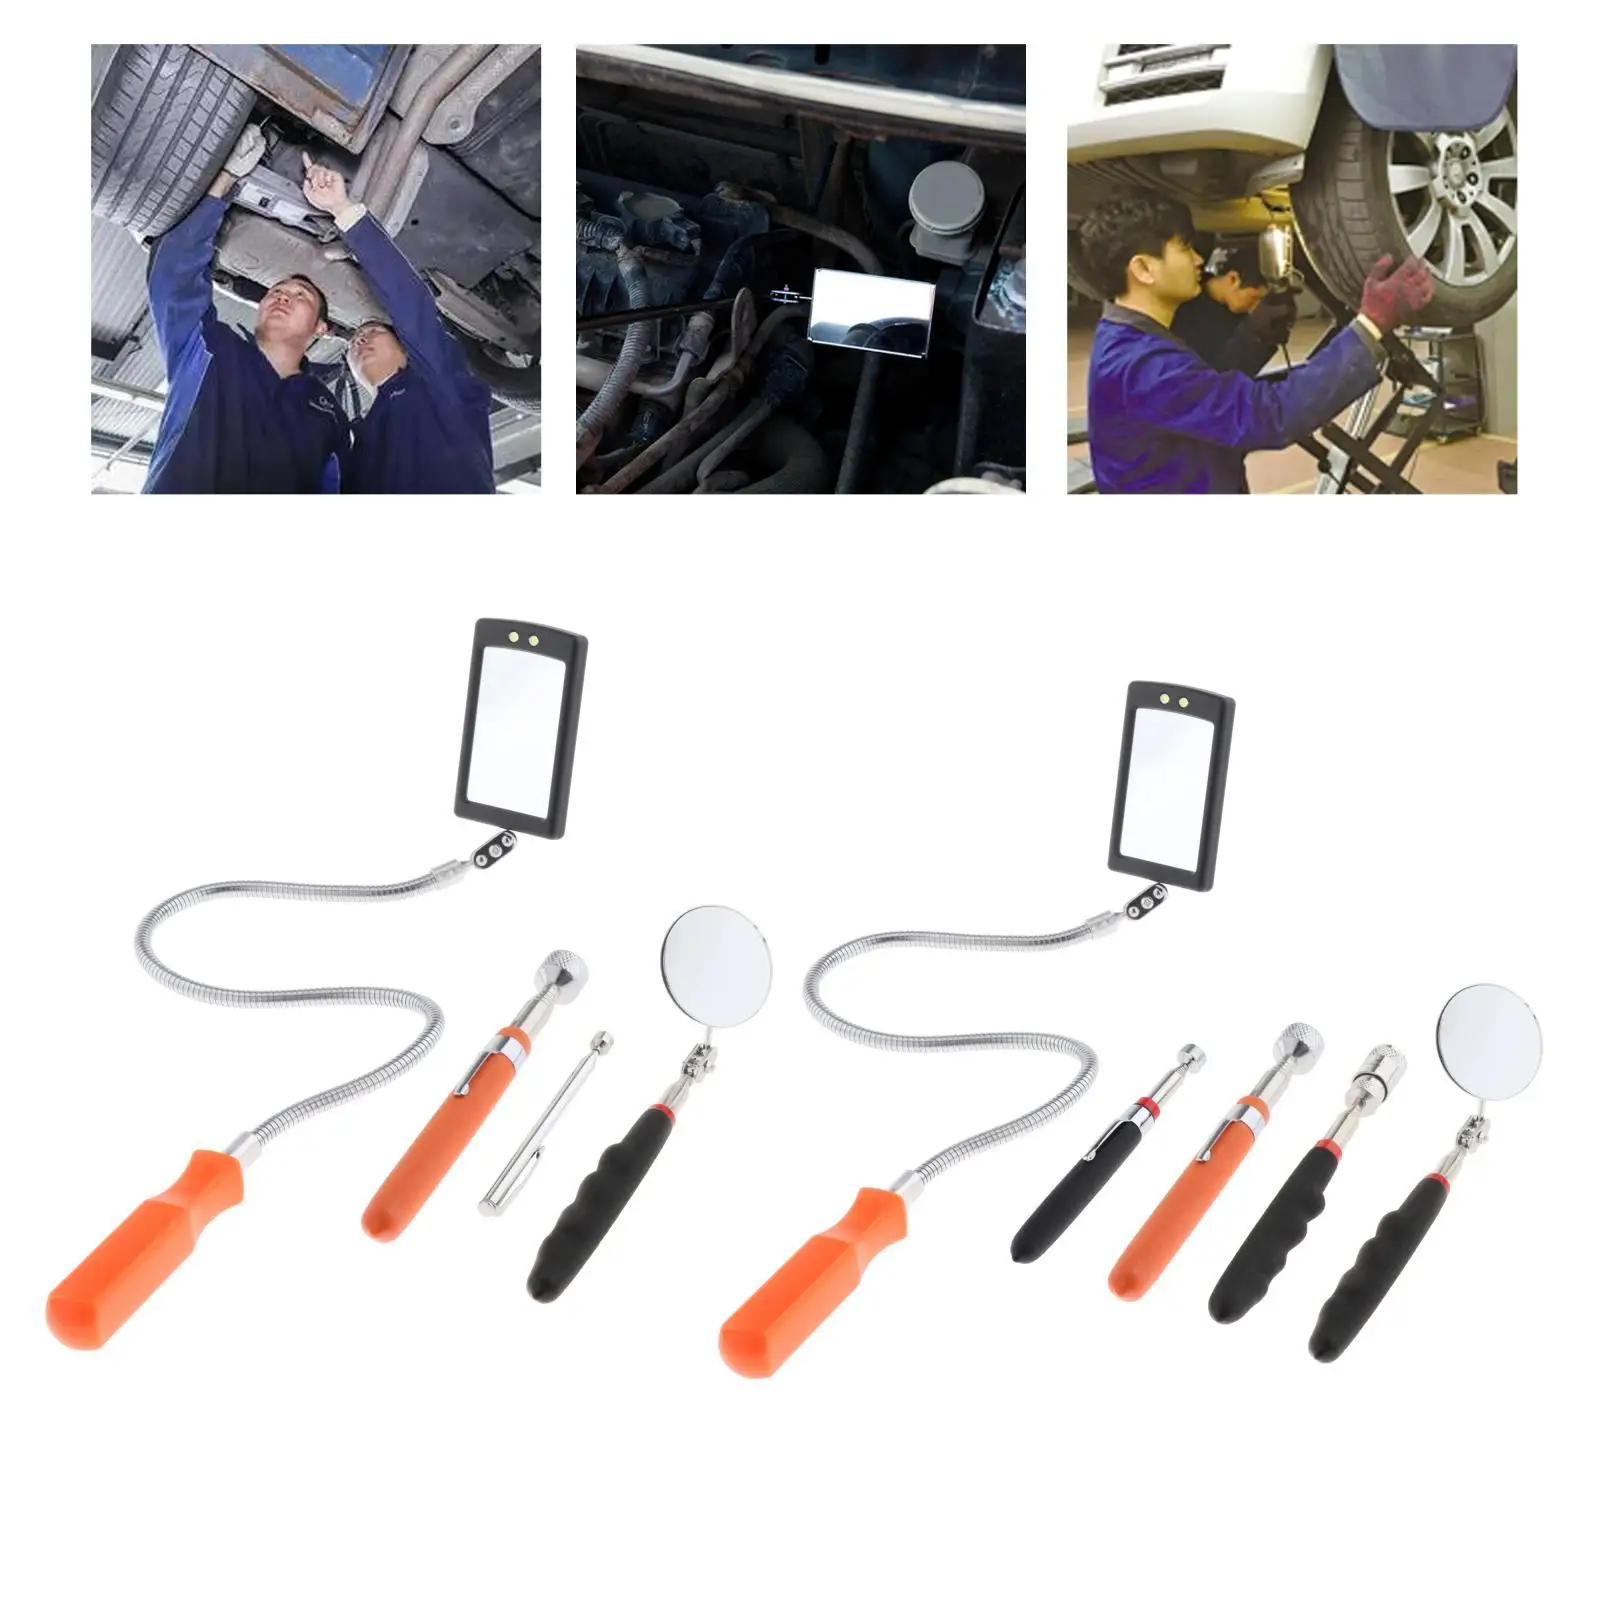 Telescoping Pick Set with Pick up Rod Telescoping Handle Retractable Auto Repair for Bolts Mechanics 